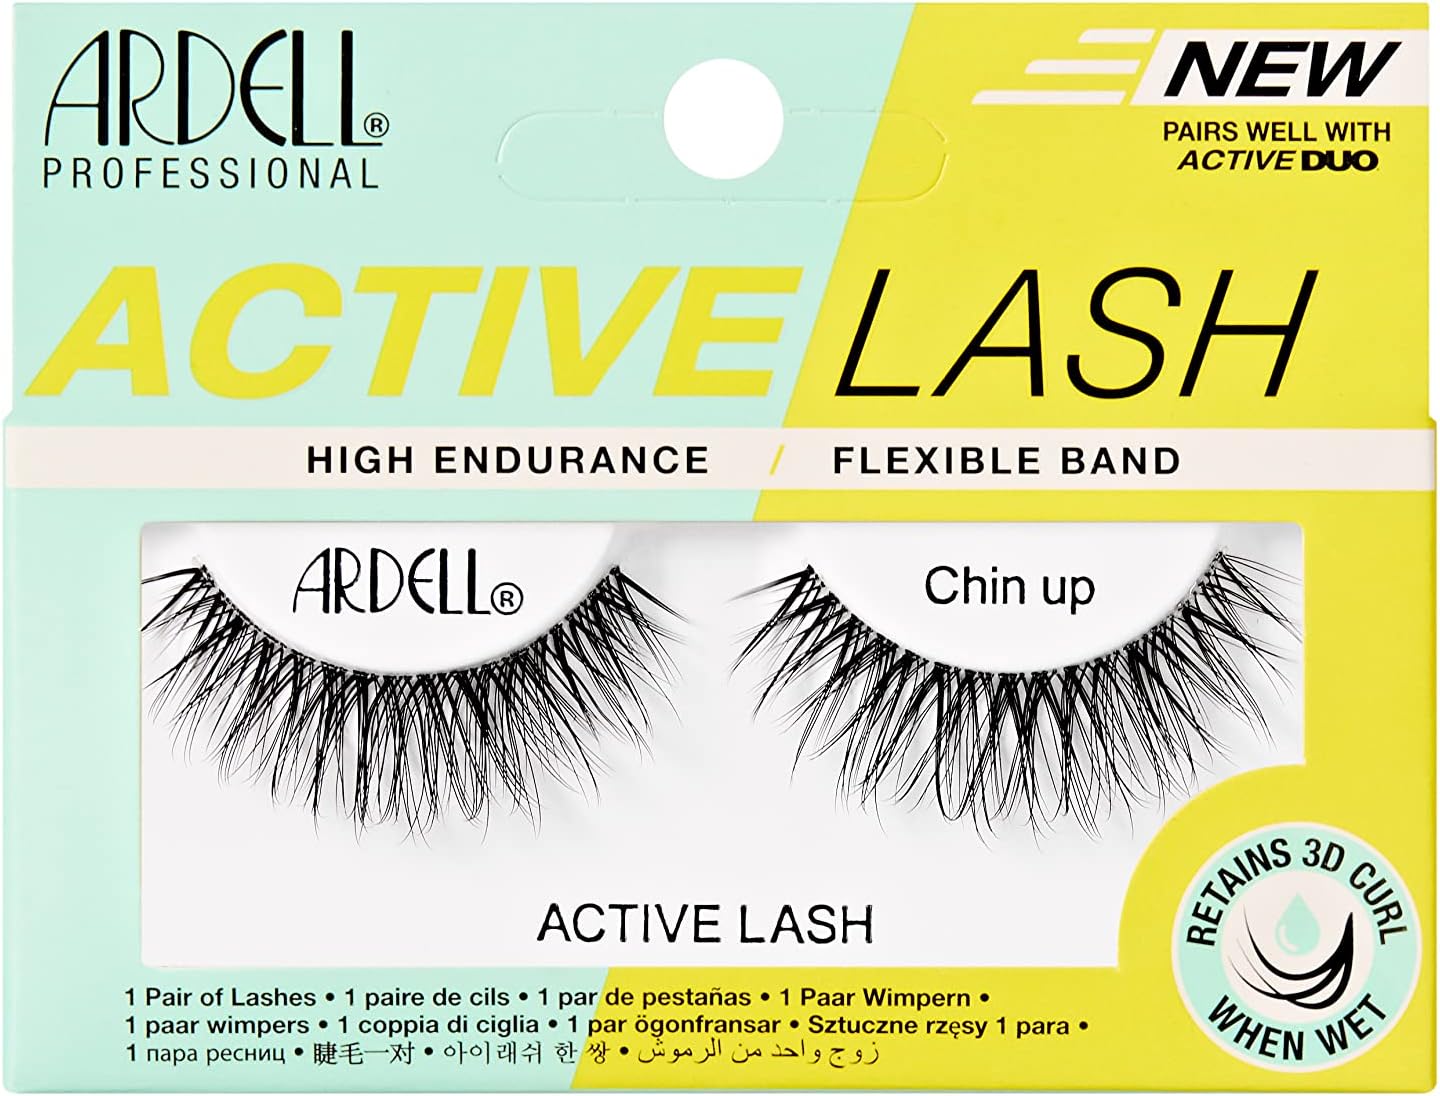 Ardell Active Lash Chin Up False Eyelashes, Water-resistant, Medium Volume and Length, Vegan Friendly, 1 Pair (Pack of 1)